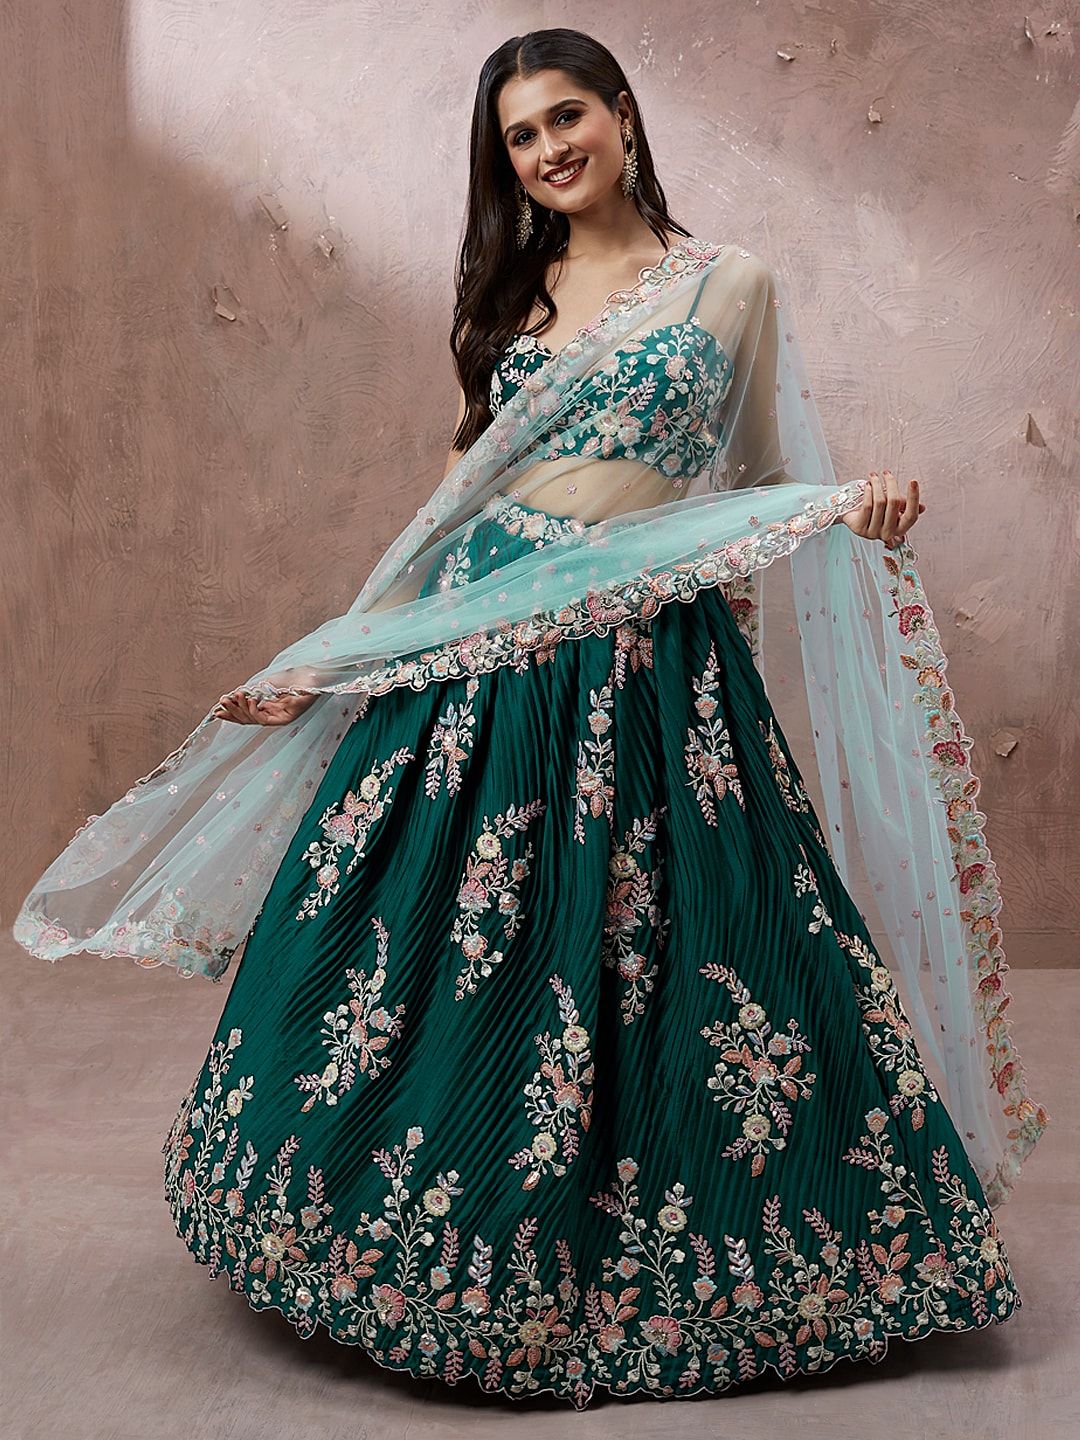 panchhi Embroidered Thread Work Semi-Stitched Lehenga & Unstitched Blouse With Dupatta Price in India